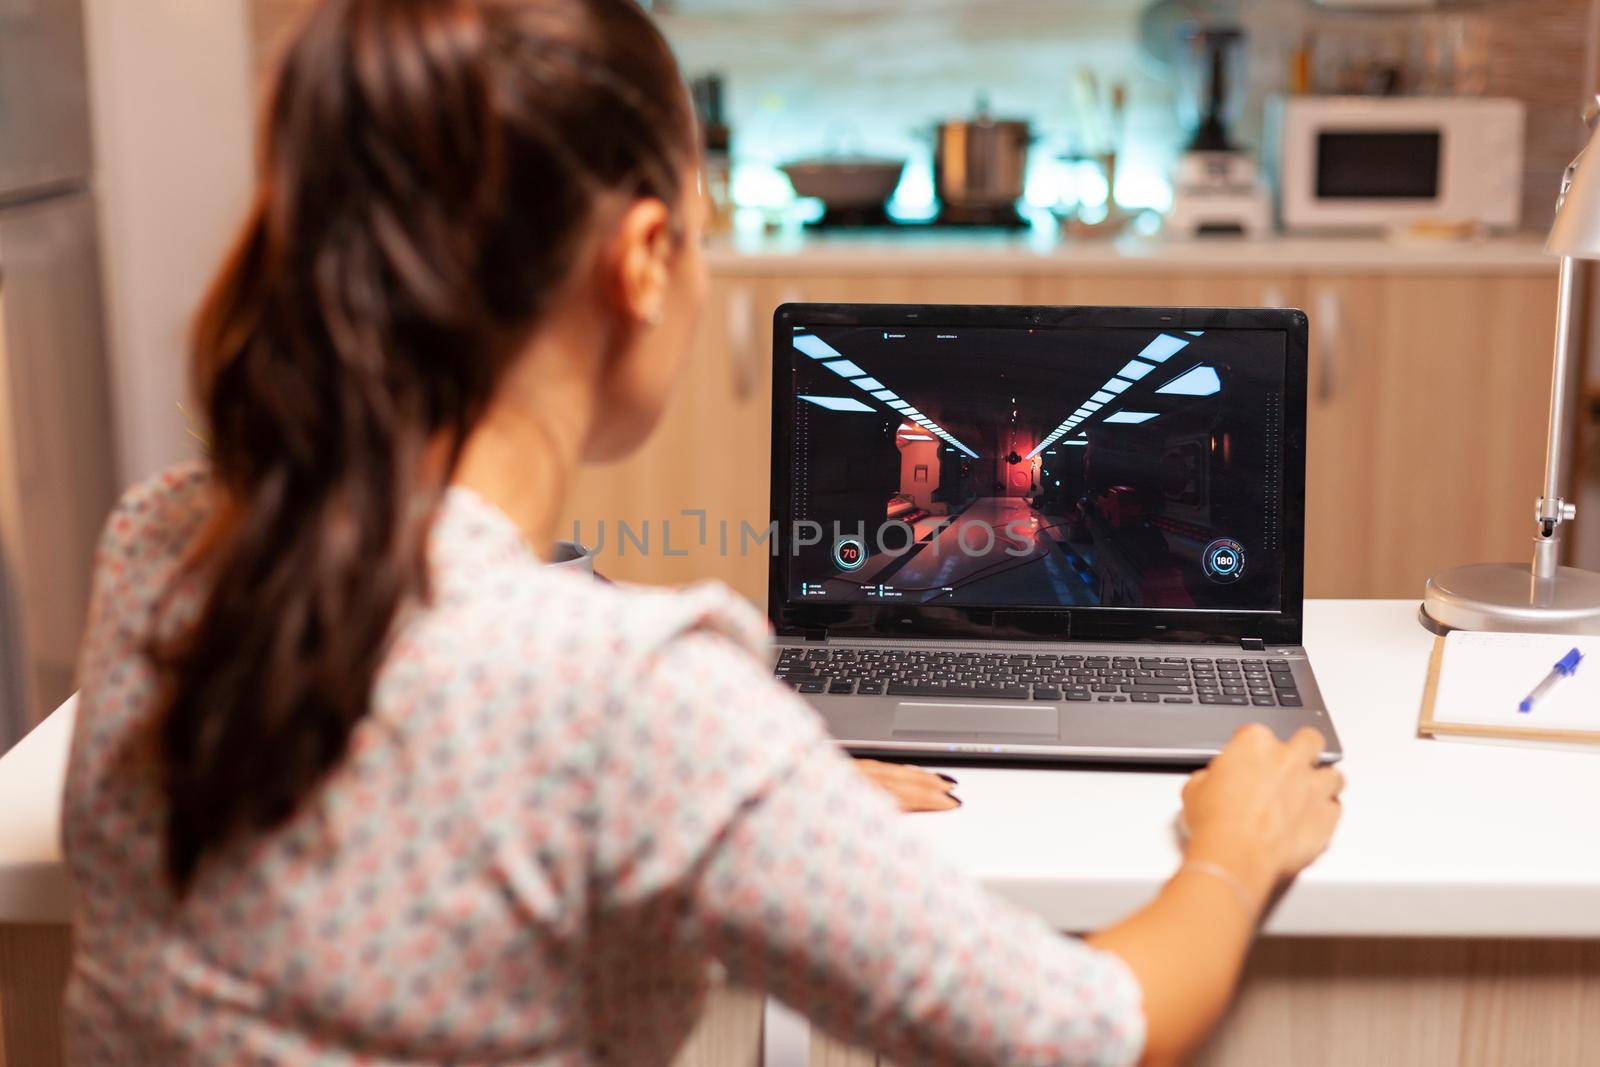 Lady playing games on laptop during night time by DCStudio